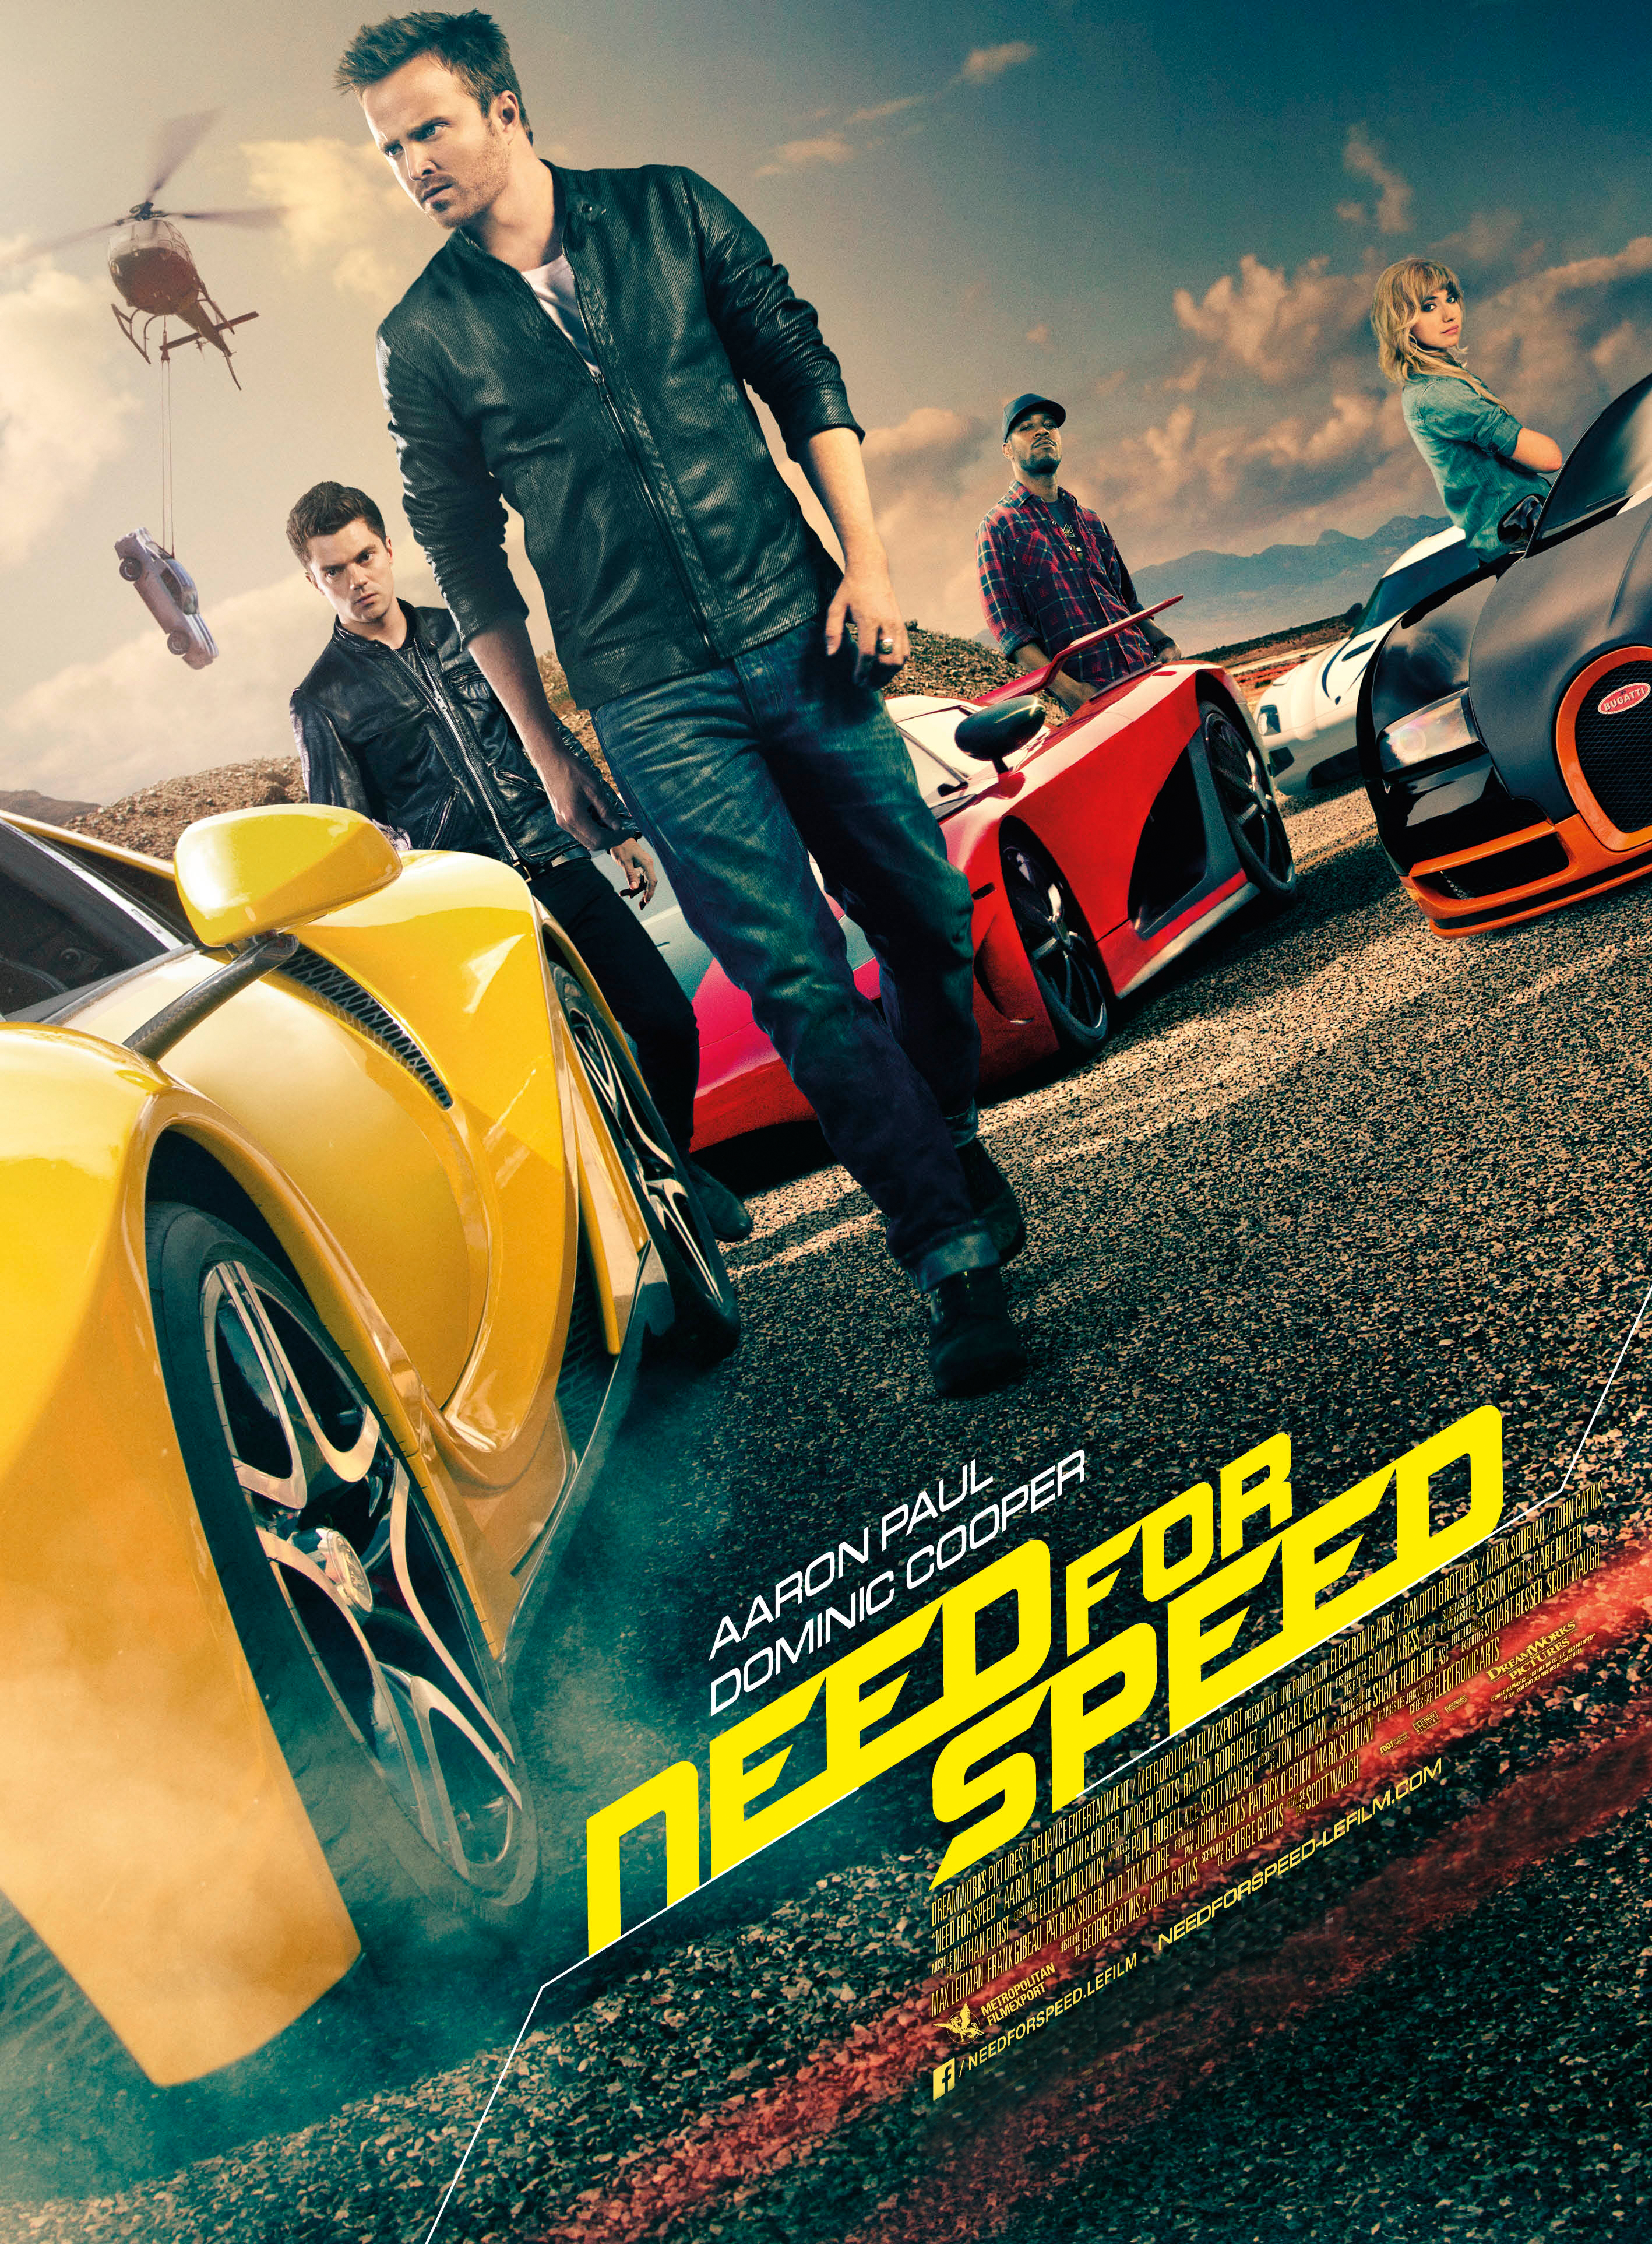 Pete from Need for Speed such a cutie:)  Need for speed, Need for speed  movie, People